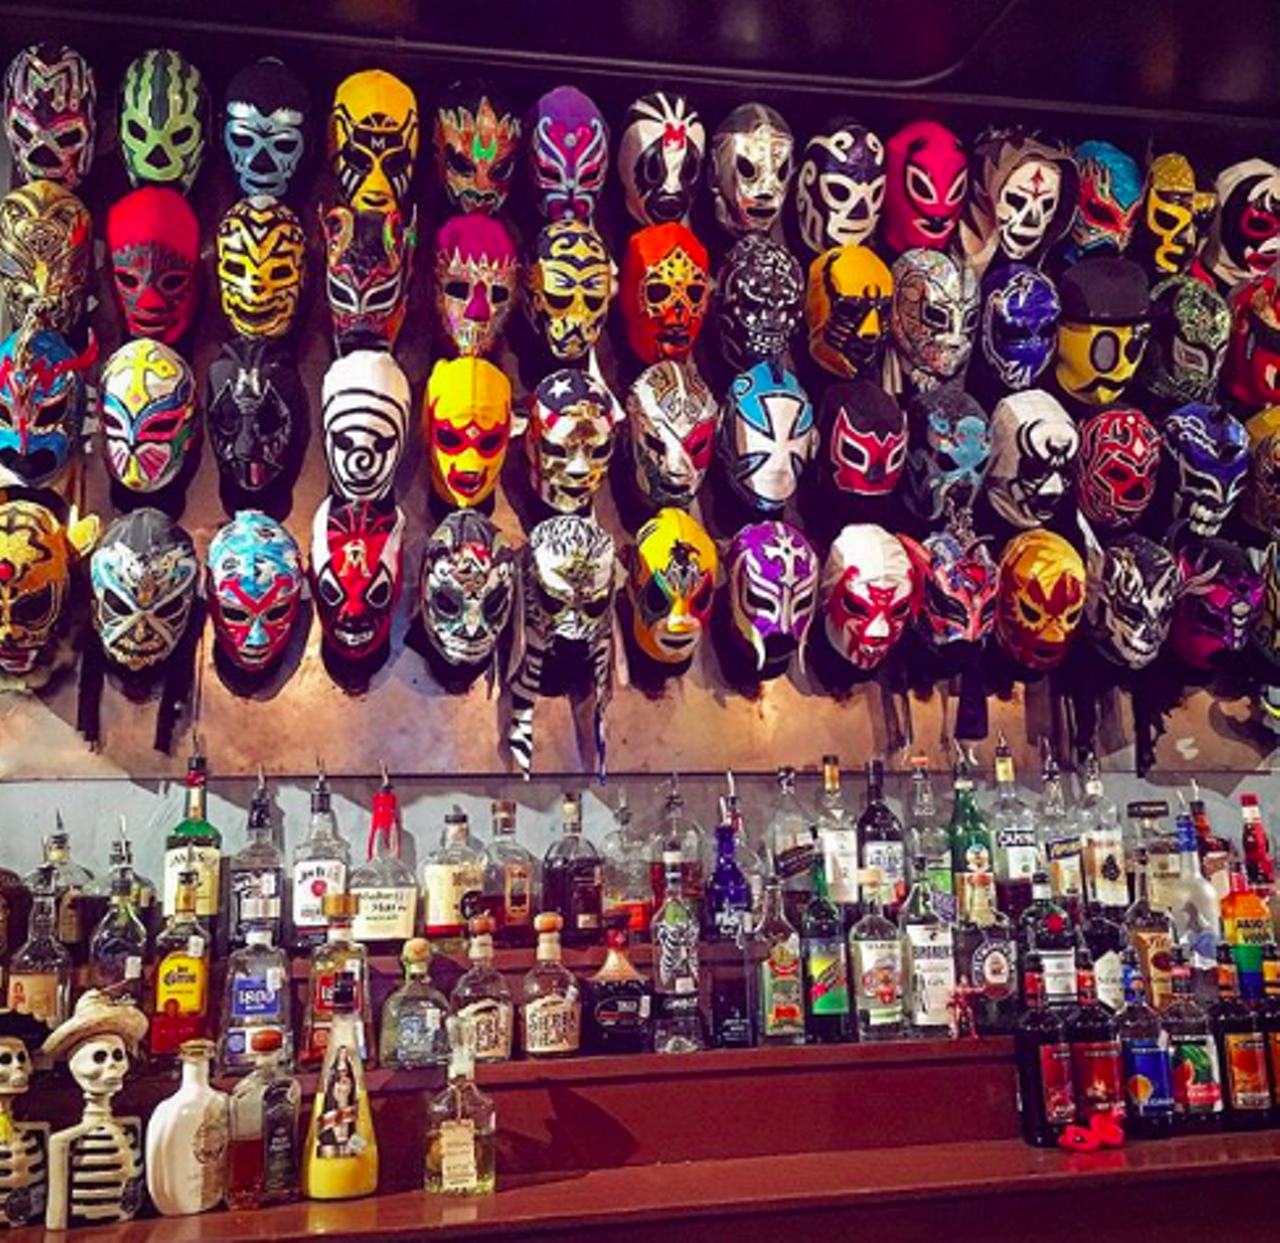 El Luchador
622 Roosevelt Ave, (210) 272-0016, facebook.com/luchadorbarsa
Bow down to el supreme luchador! You’ll love the Lucha Libre theme and let loose with the cocktail menu and weekly DJ takeovers.
Photo via Instagram / chachaluxedevil